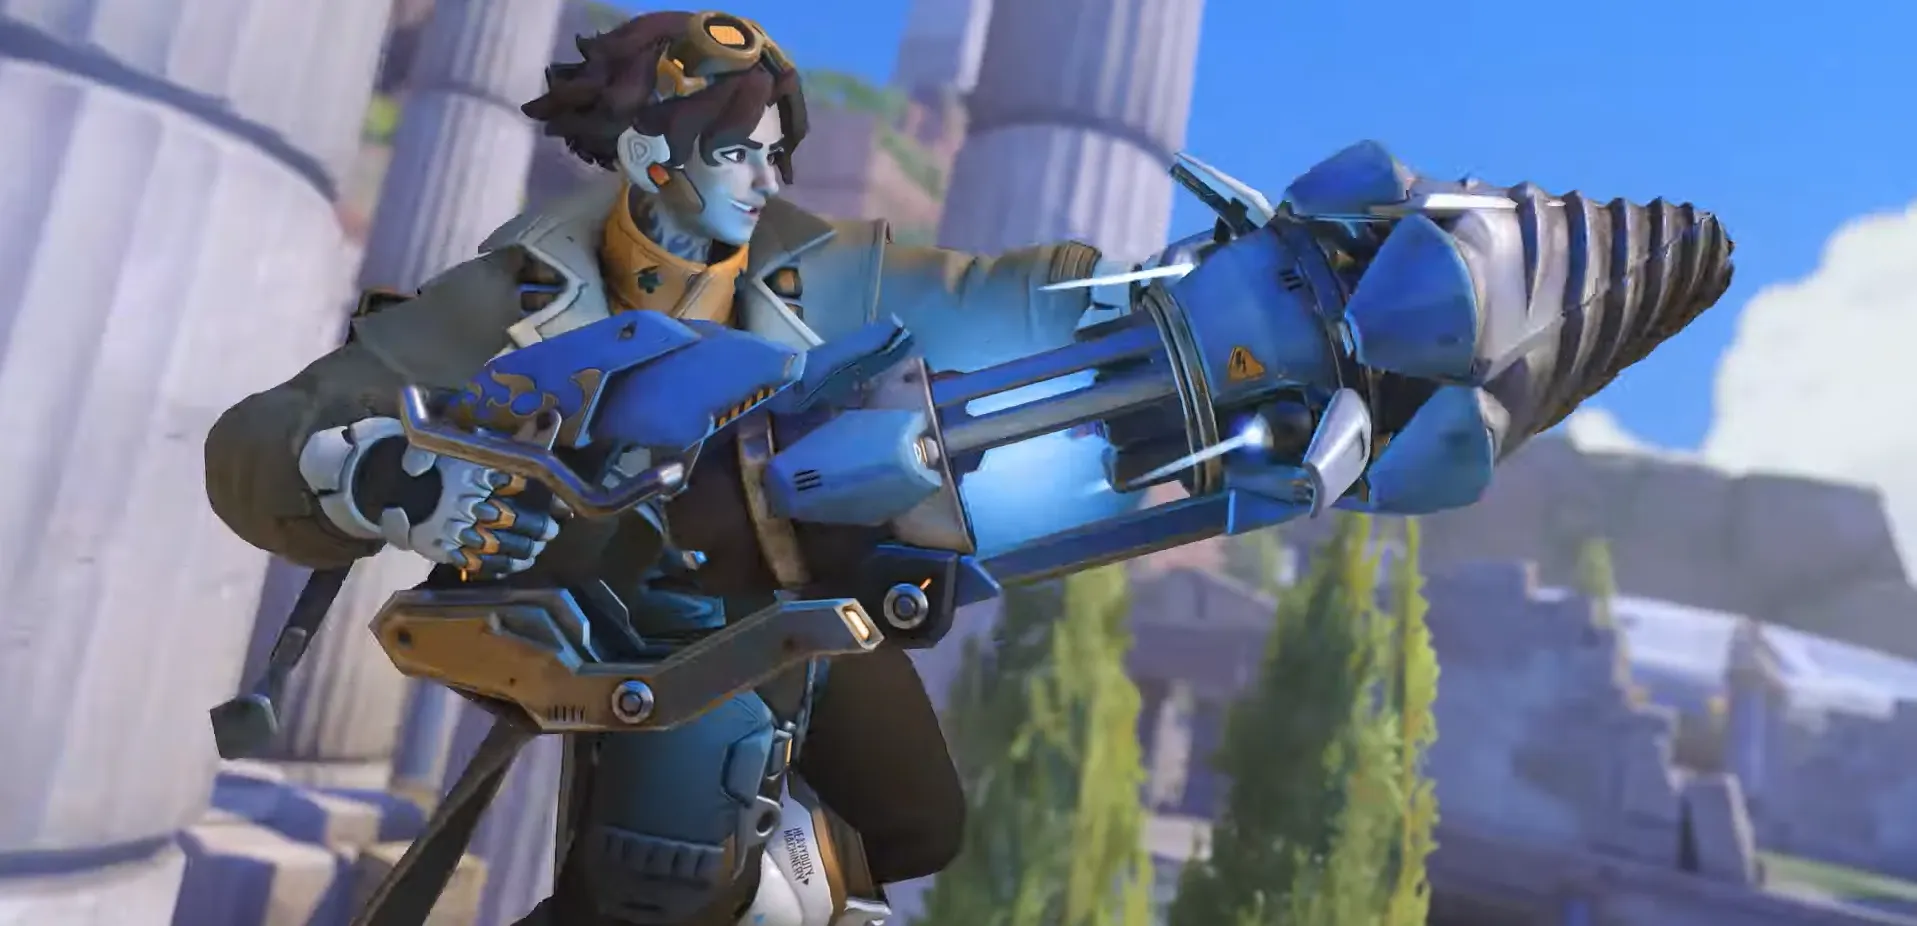 Overwatch 2 New DPS Hero Venture: All Abilities, Release Date, Play Trial & More